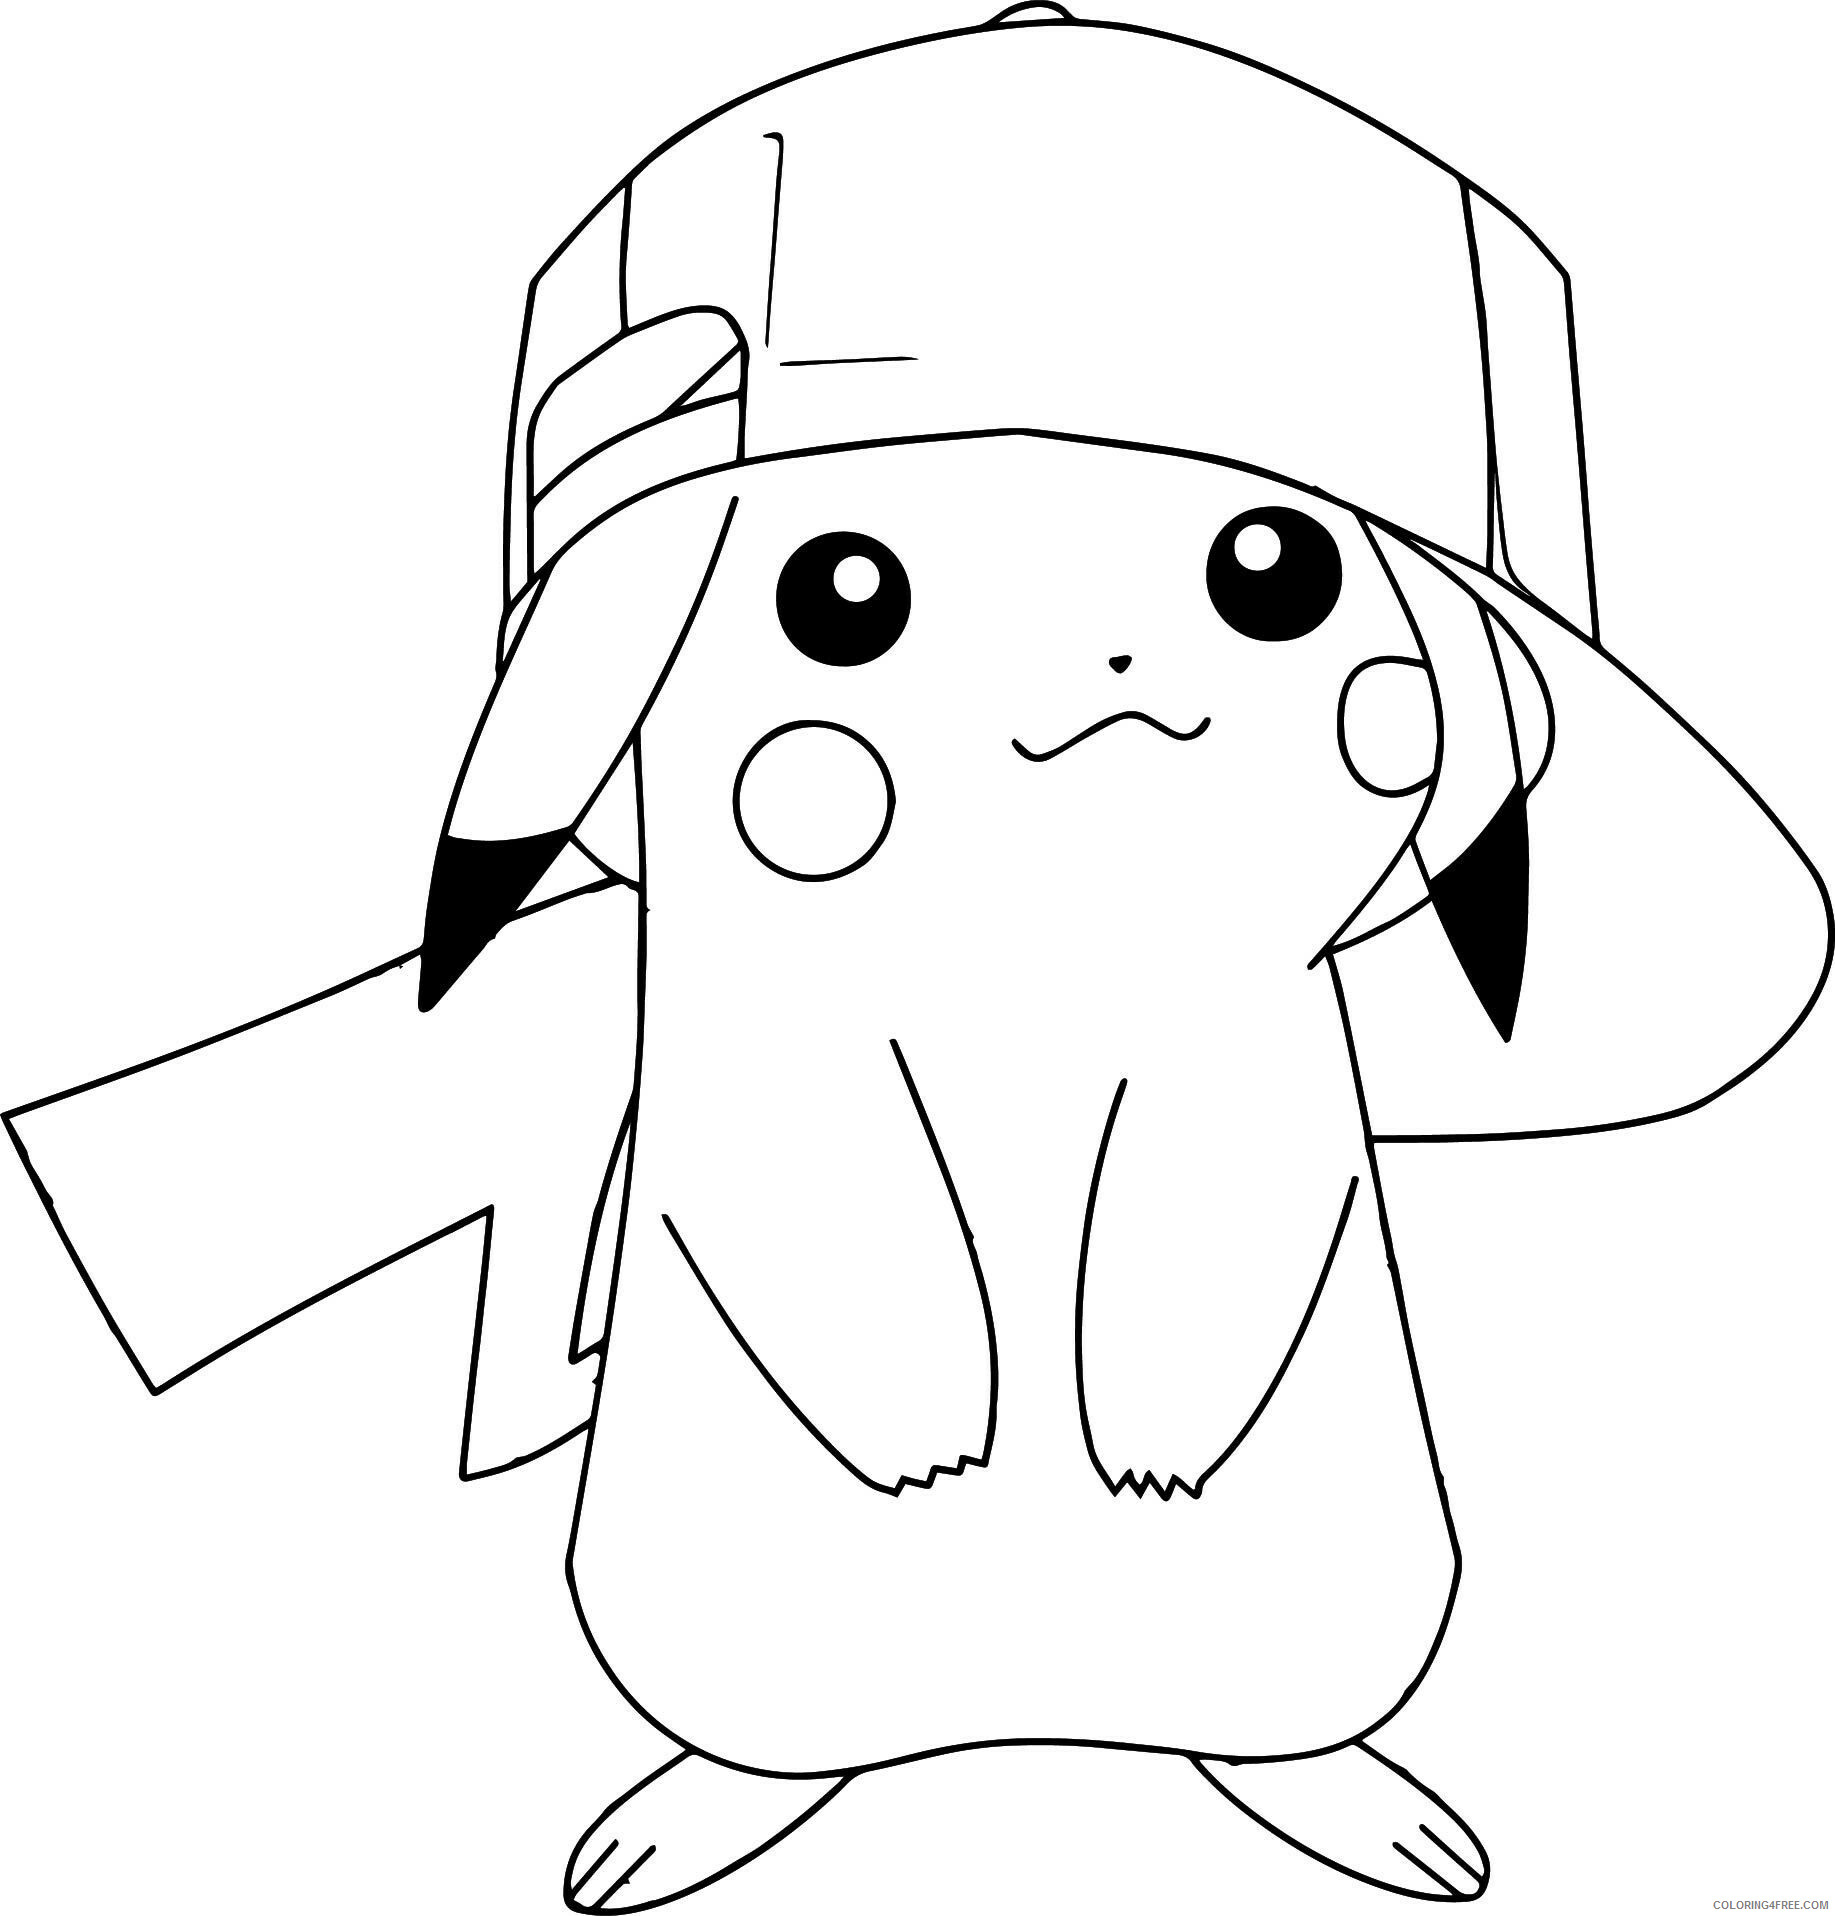 Pikachu Printable Coloring Pages Anime Funny Pikachu 2021 0939 Coloring4free